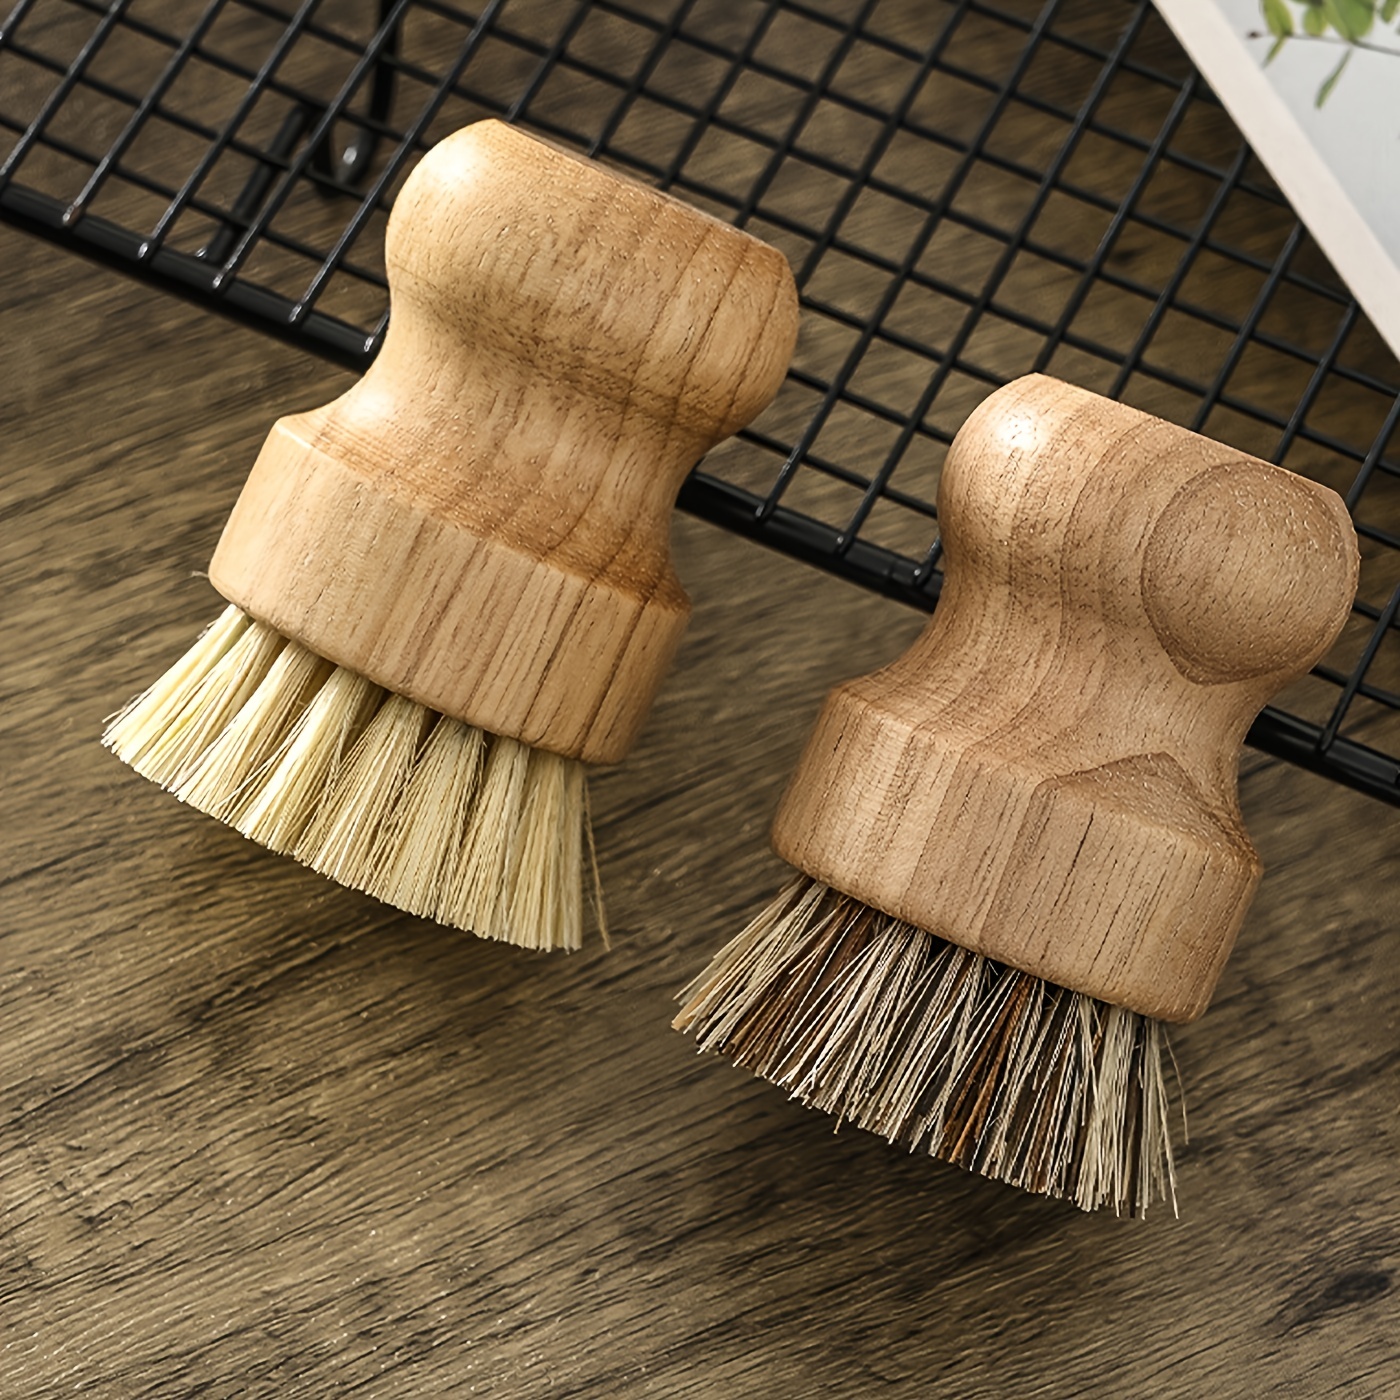 Set of 3 Dish Scrub Brushes Bamboo Handle Wooden Cleaning Scrubbers Brushes  Stiff Bristles for Washing Kitchen Cast Iron Pan Pot Dish Vegetables Sink